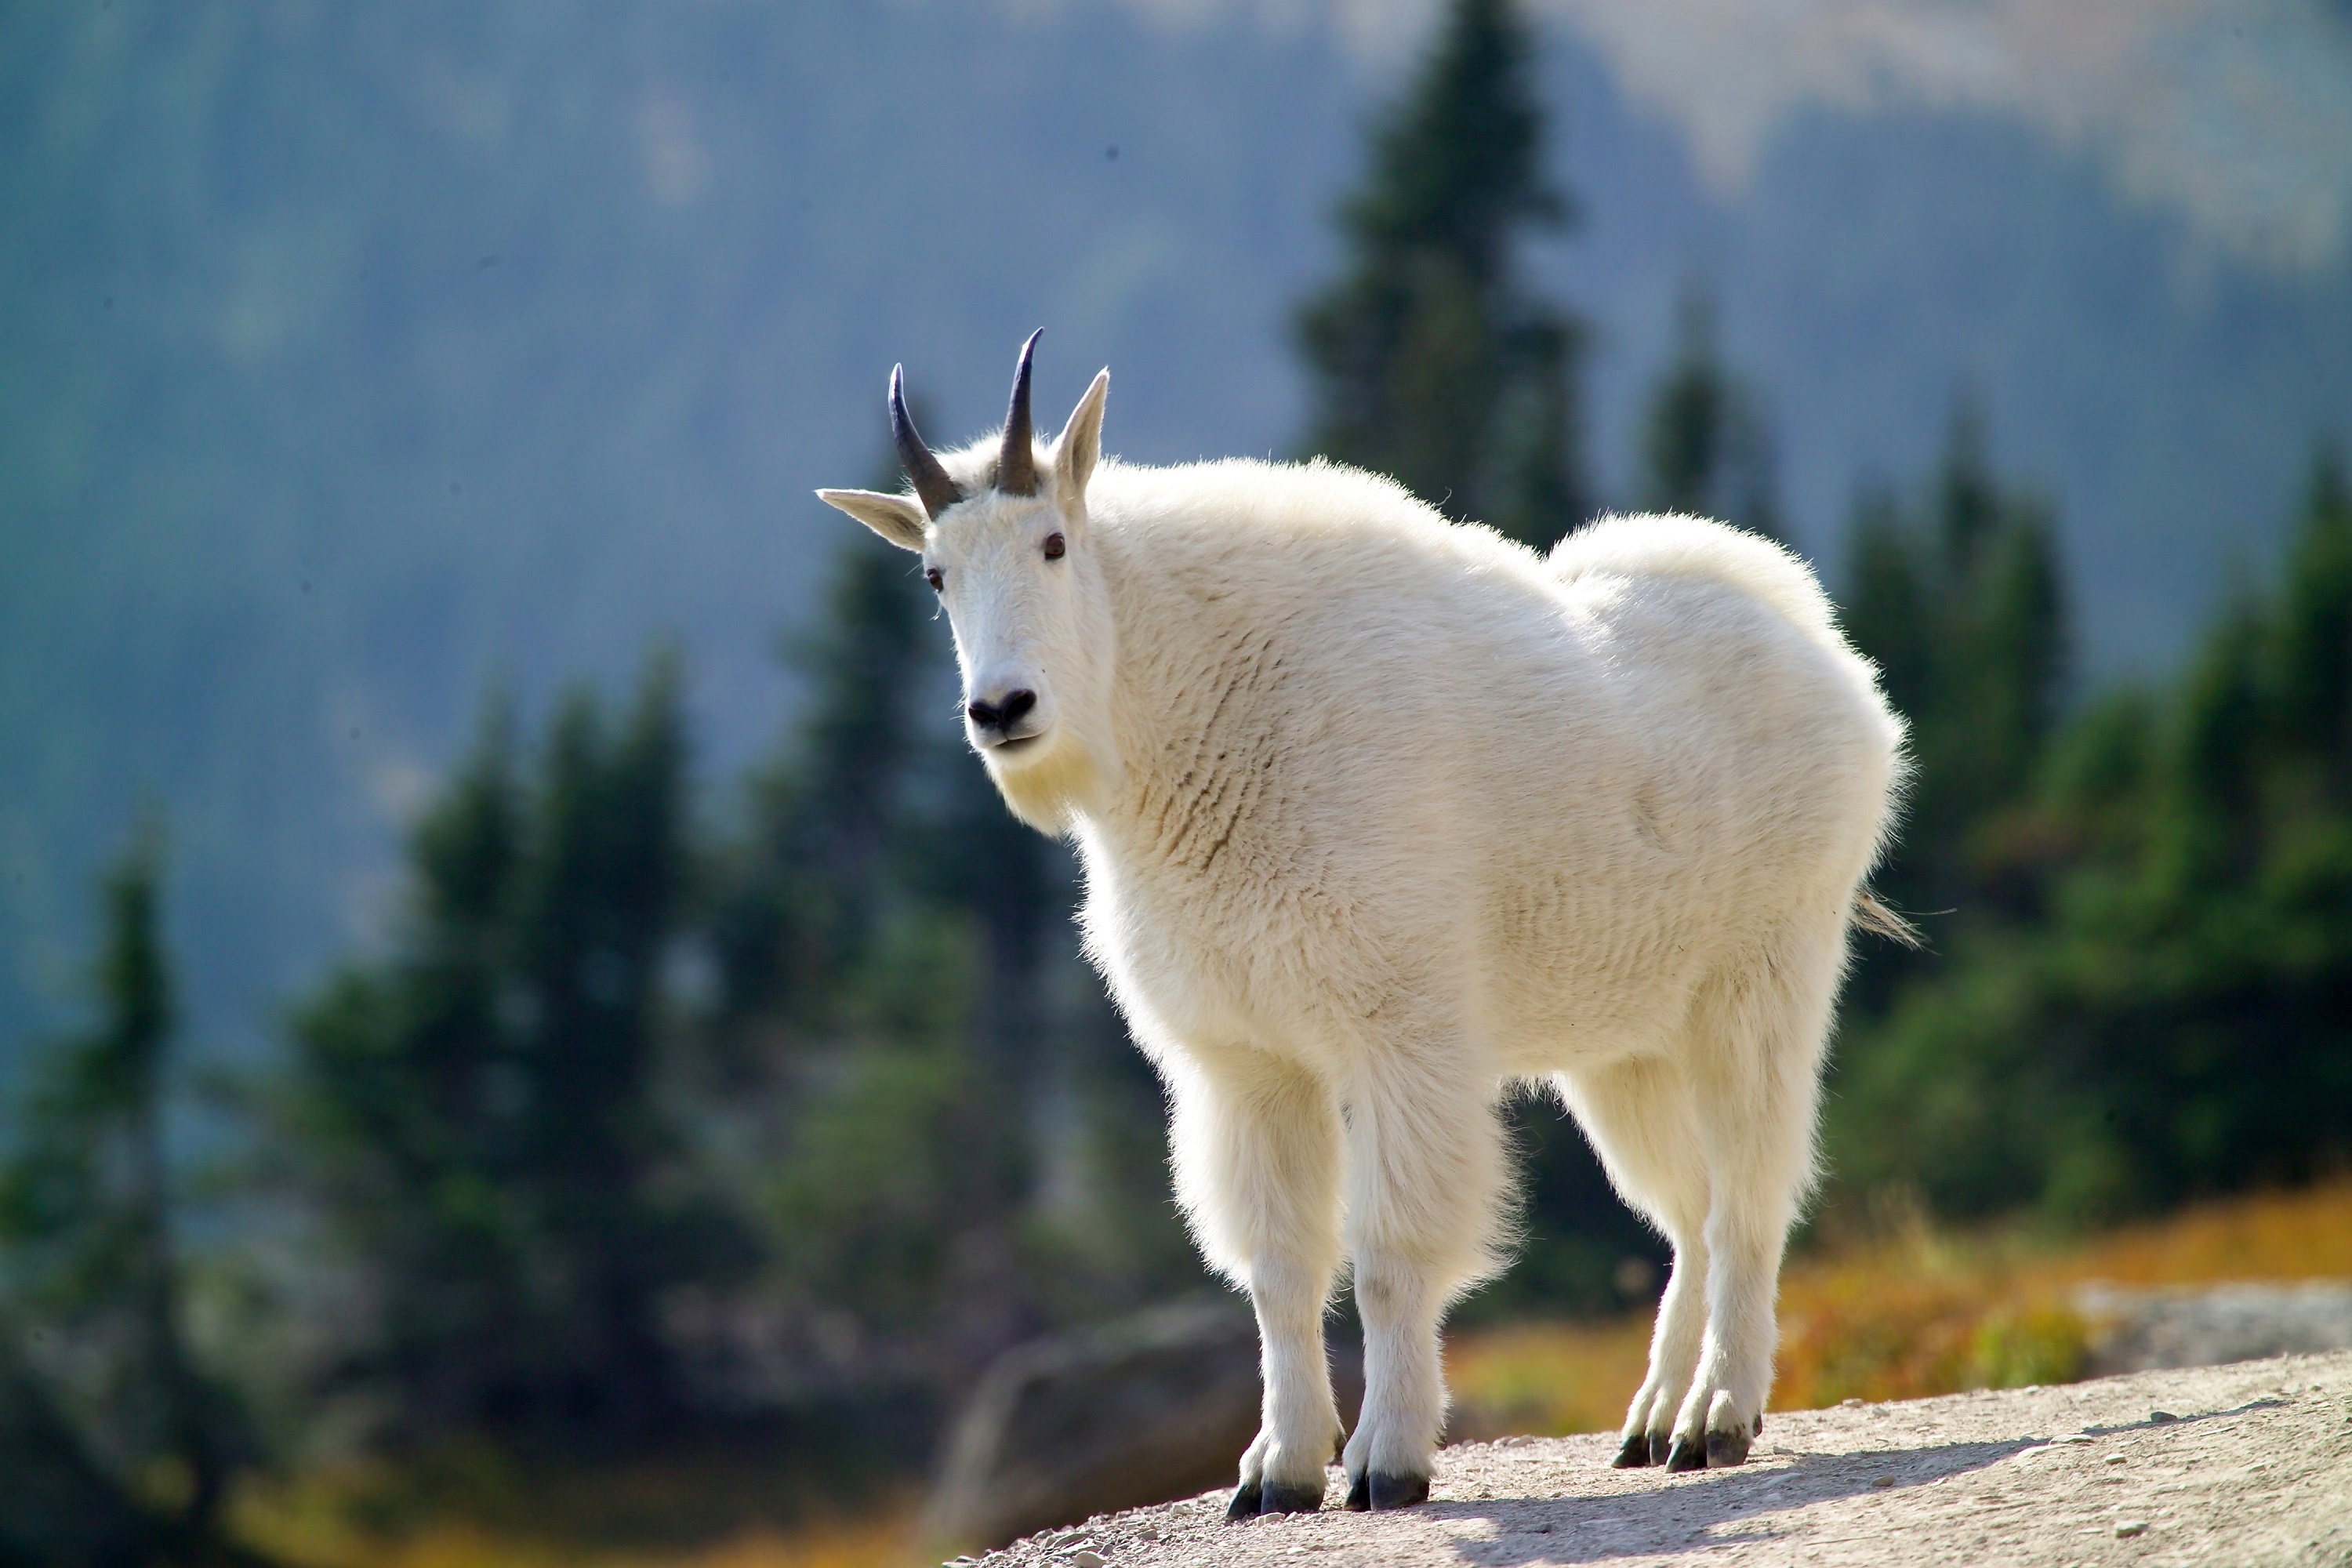 The mountain goat, also known as the Rocky Mountain goat by skeeze